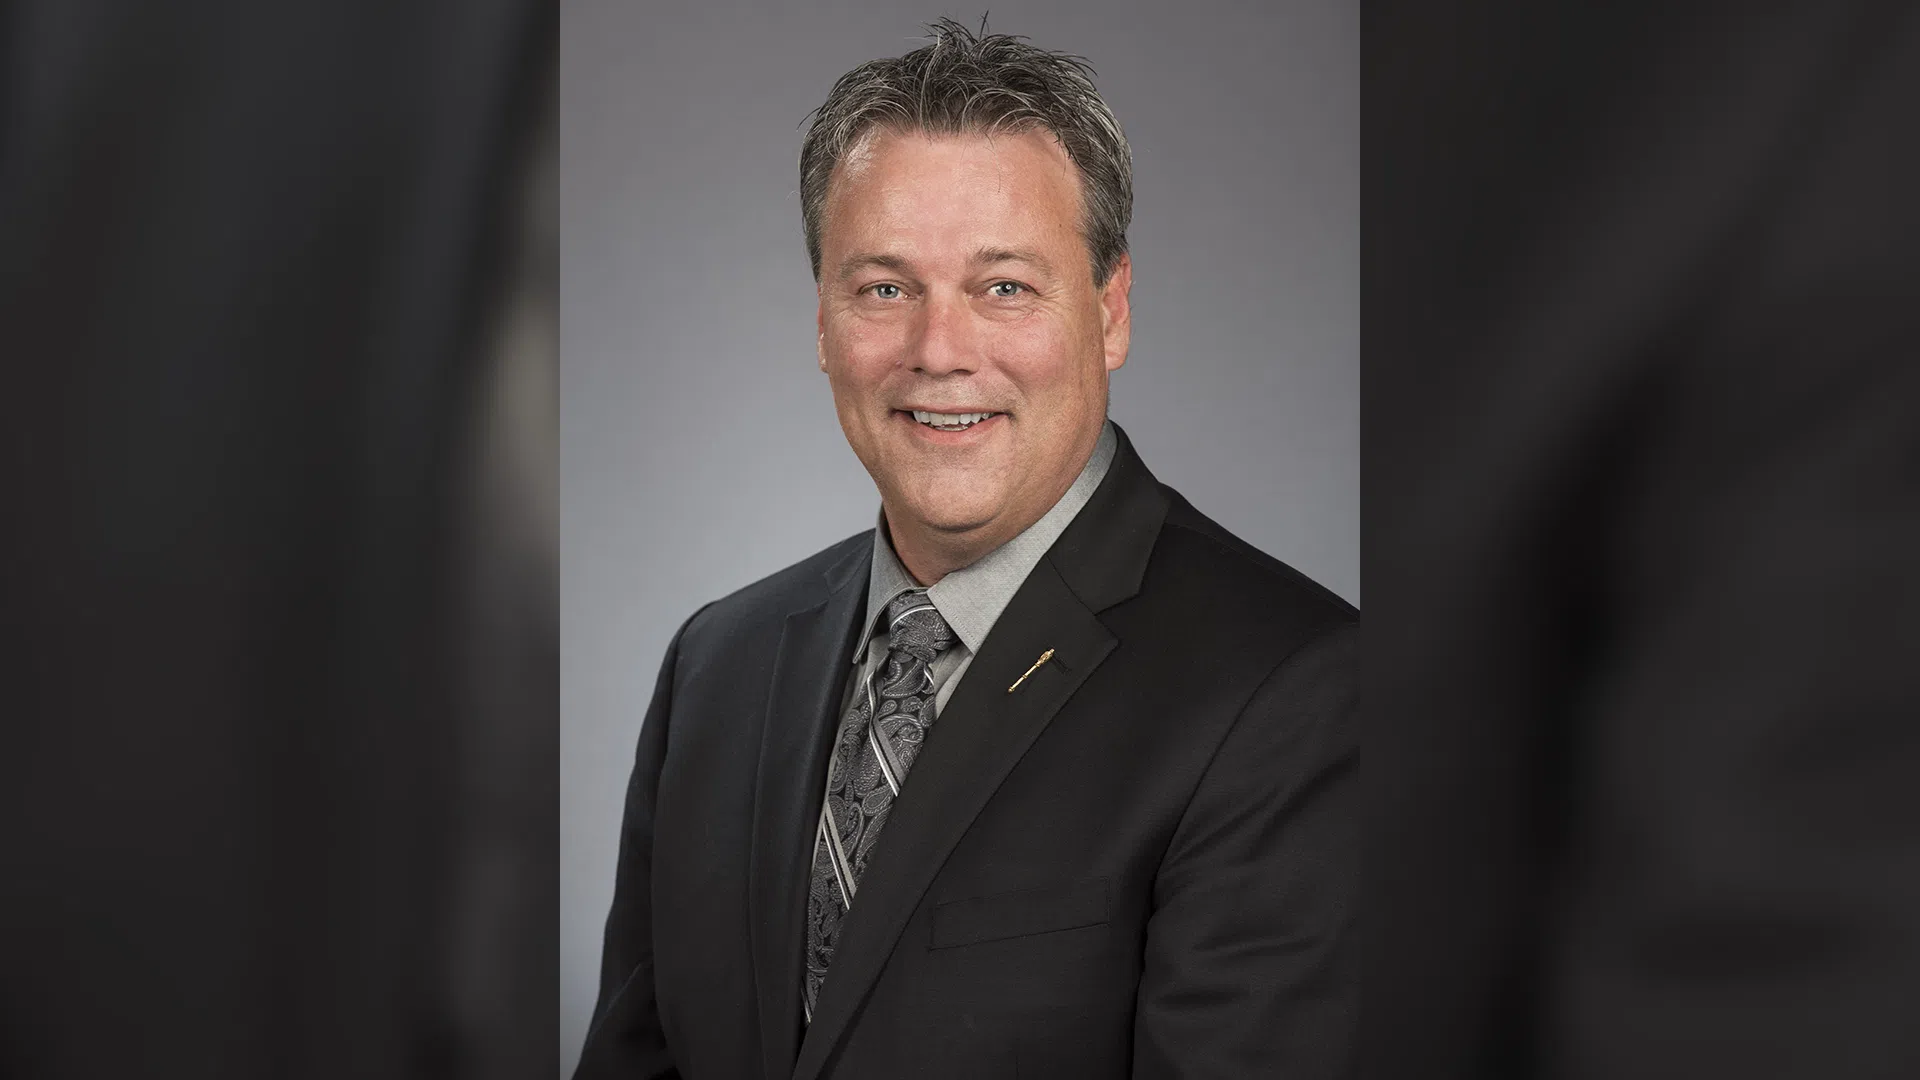 Mike Holland resigns as minister, MLA